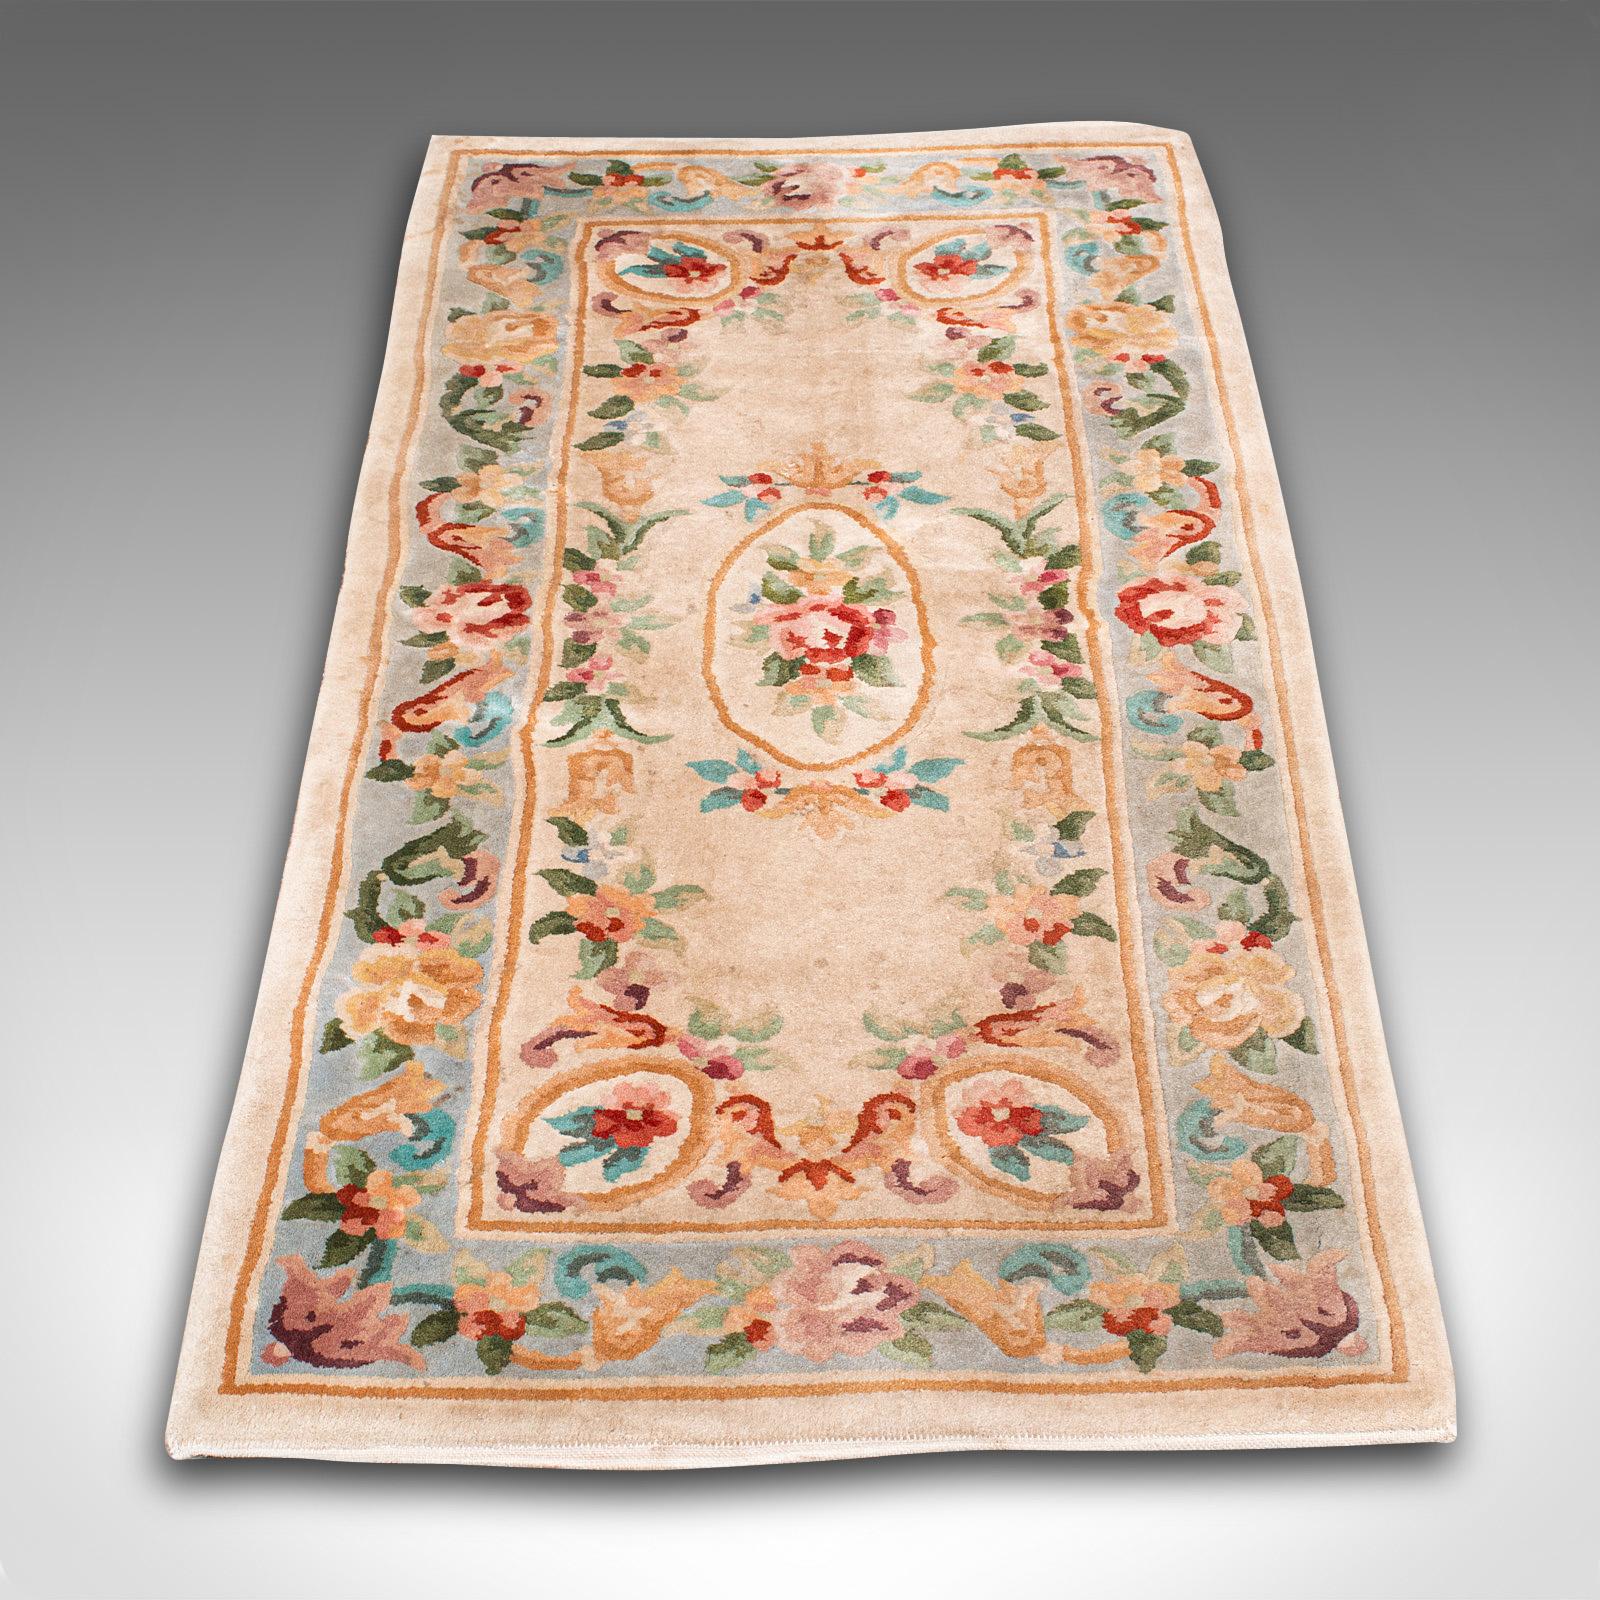 This is a vintage decorative rug. An Oriental, quality woven hallway carpet, dating to the late 20th century, circa 1970.

Generously sized for the doorway at 78.5cm x 154cm (31